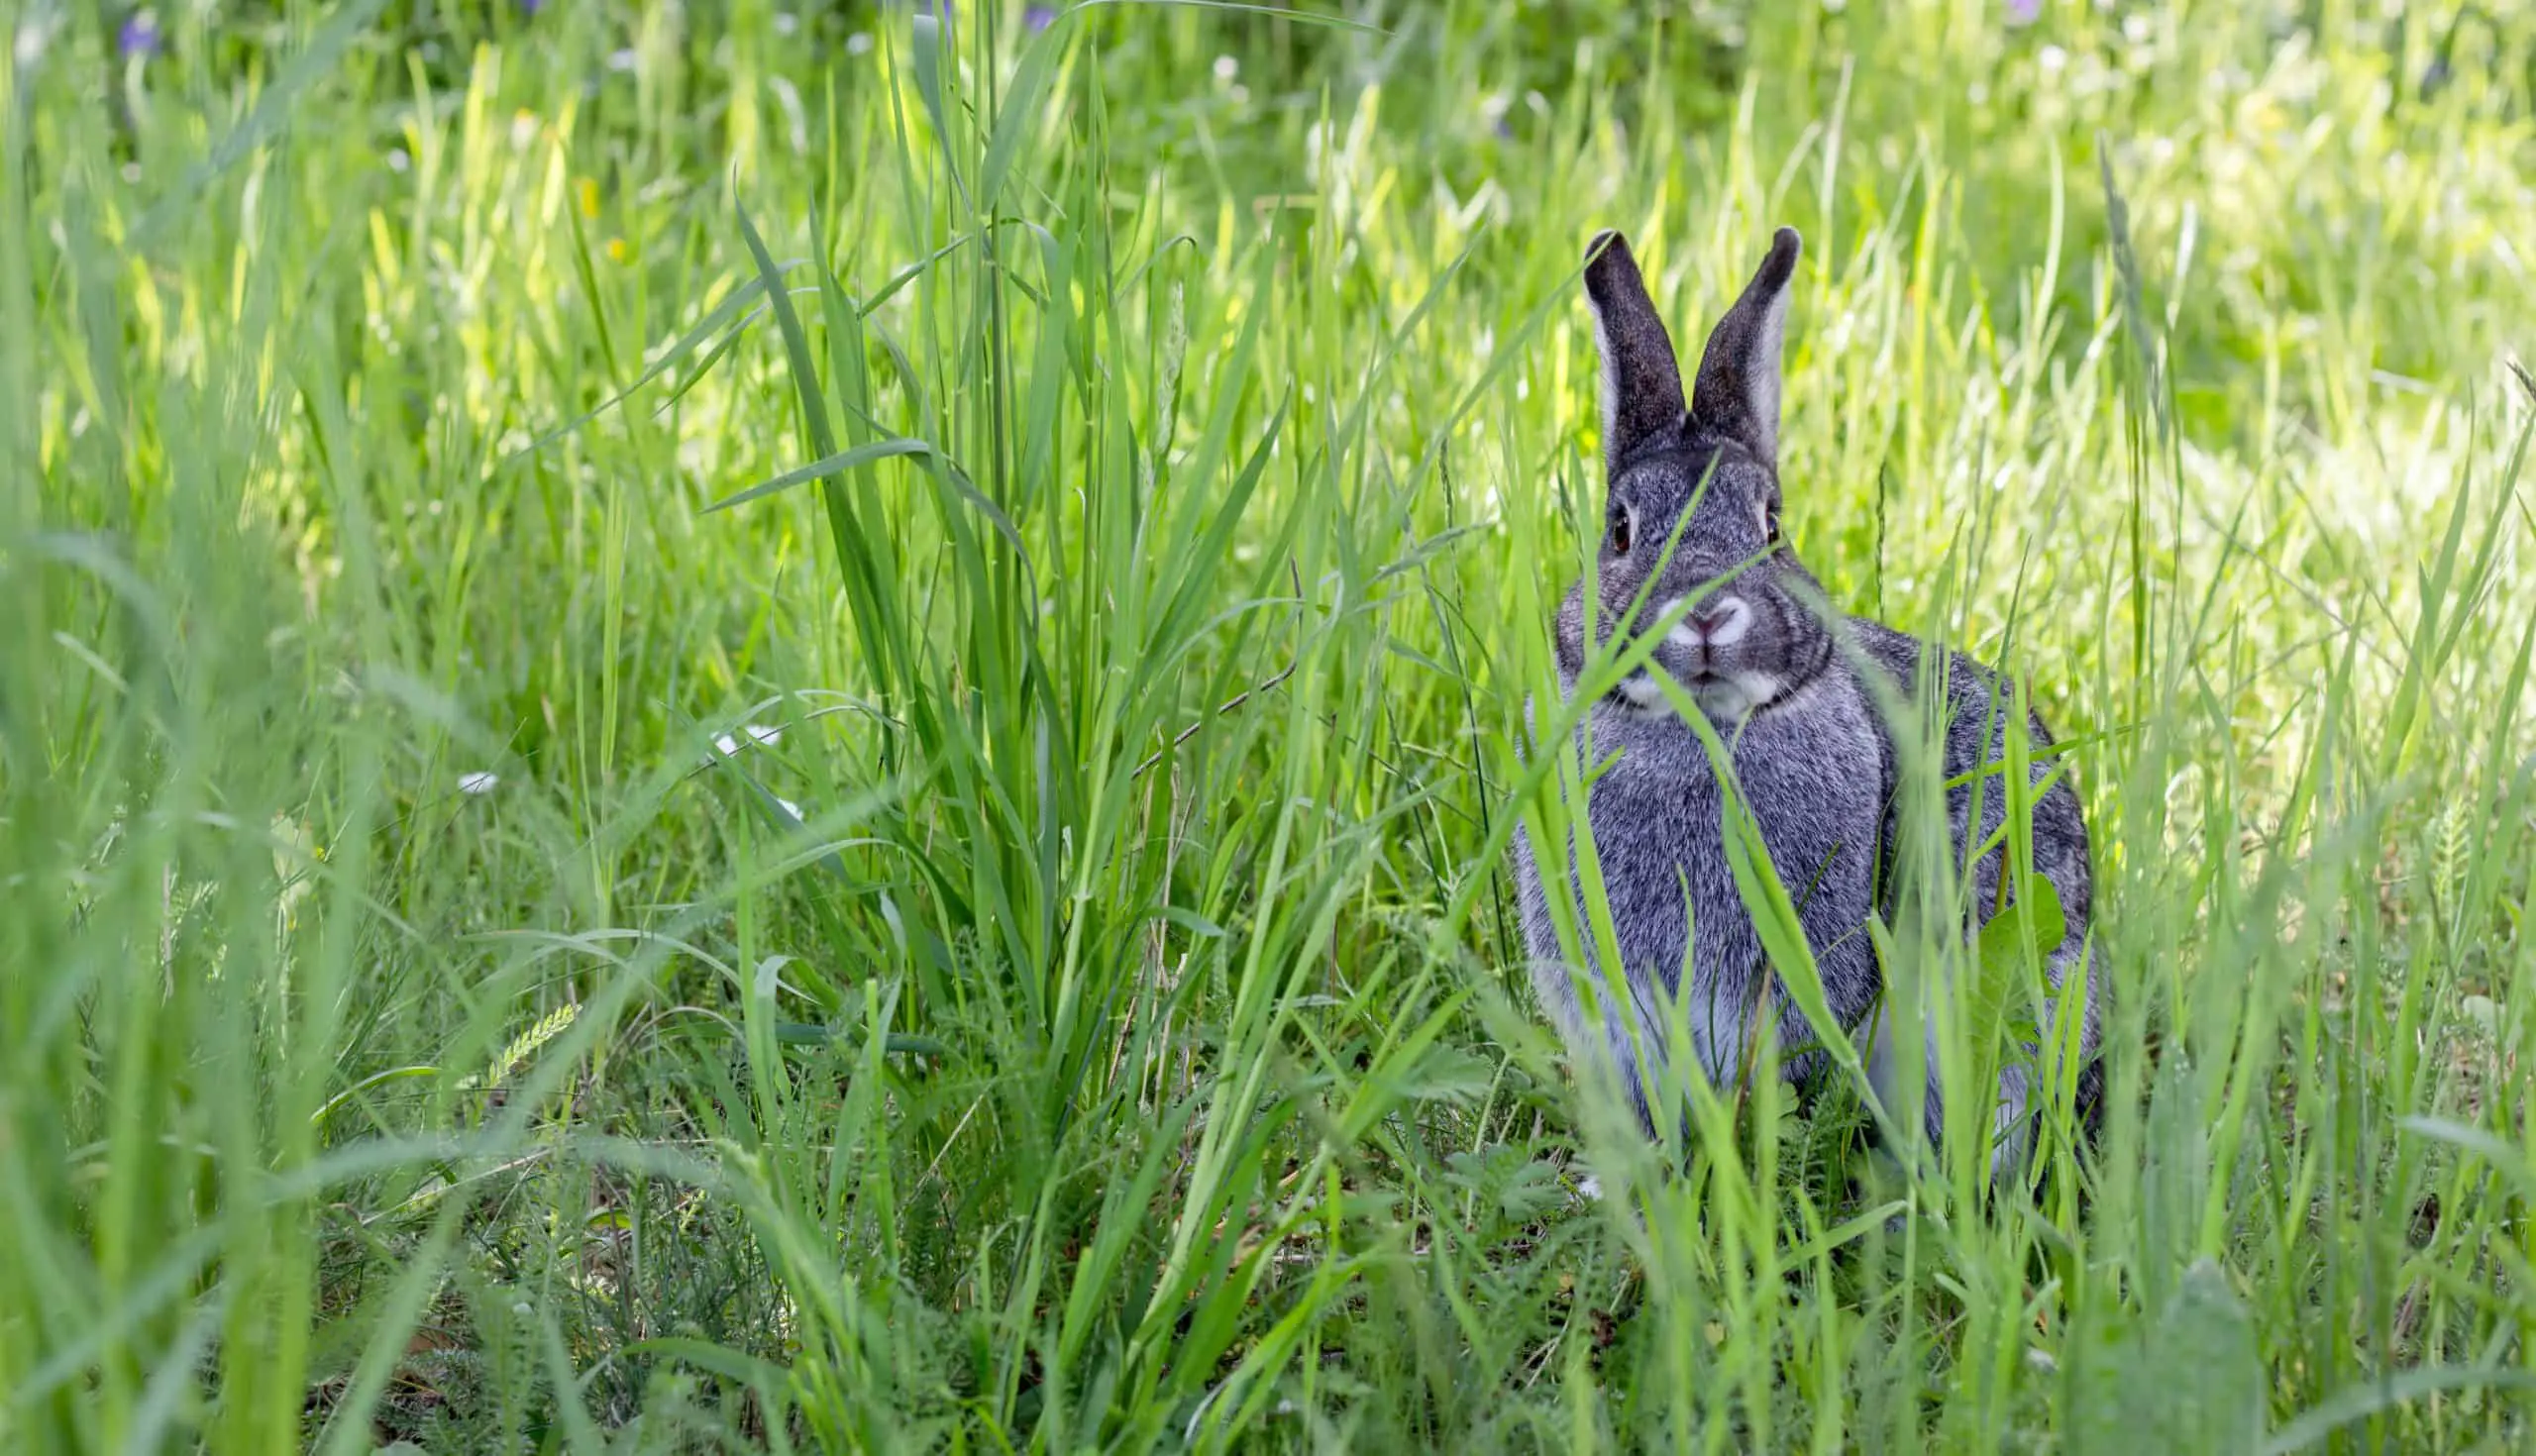 Protect your rabbit when they venture into the garden that has been sprayed with weed killer and not dried yet